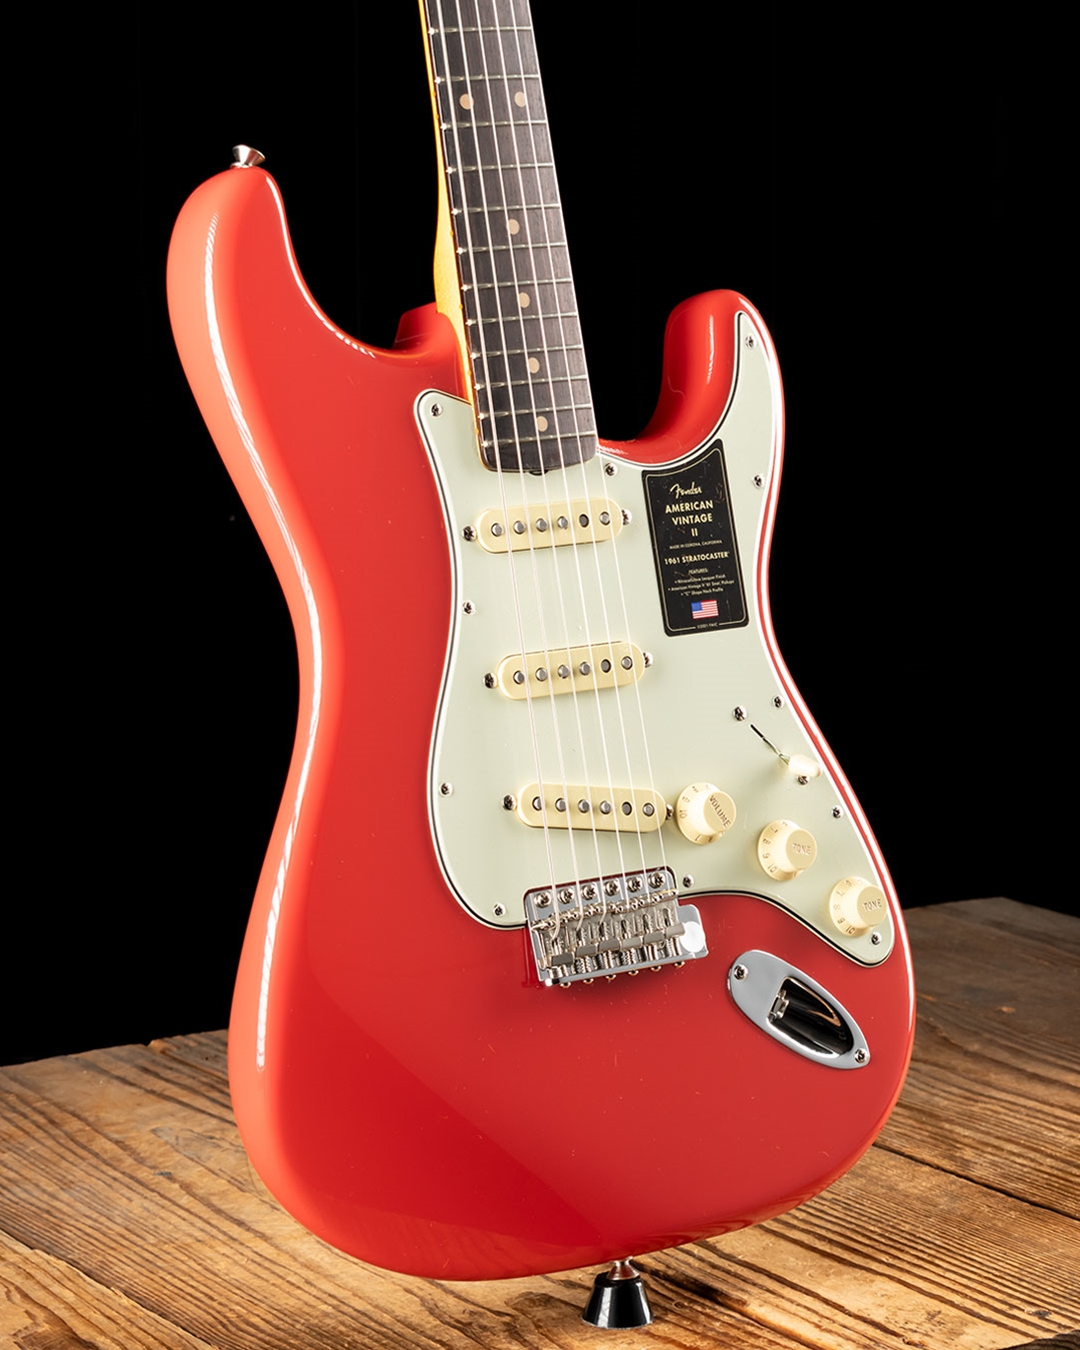 Fender American Professional II Stratocaster Review: Refining the Original